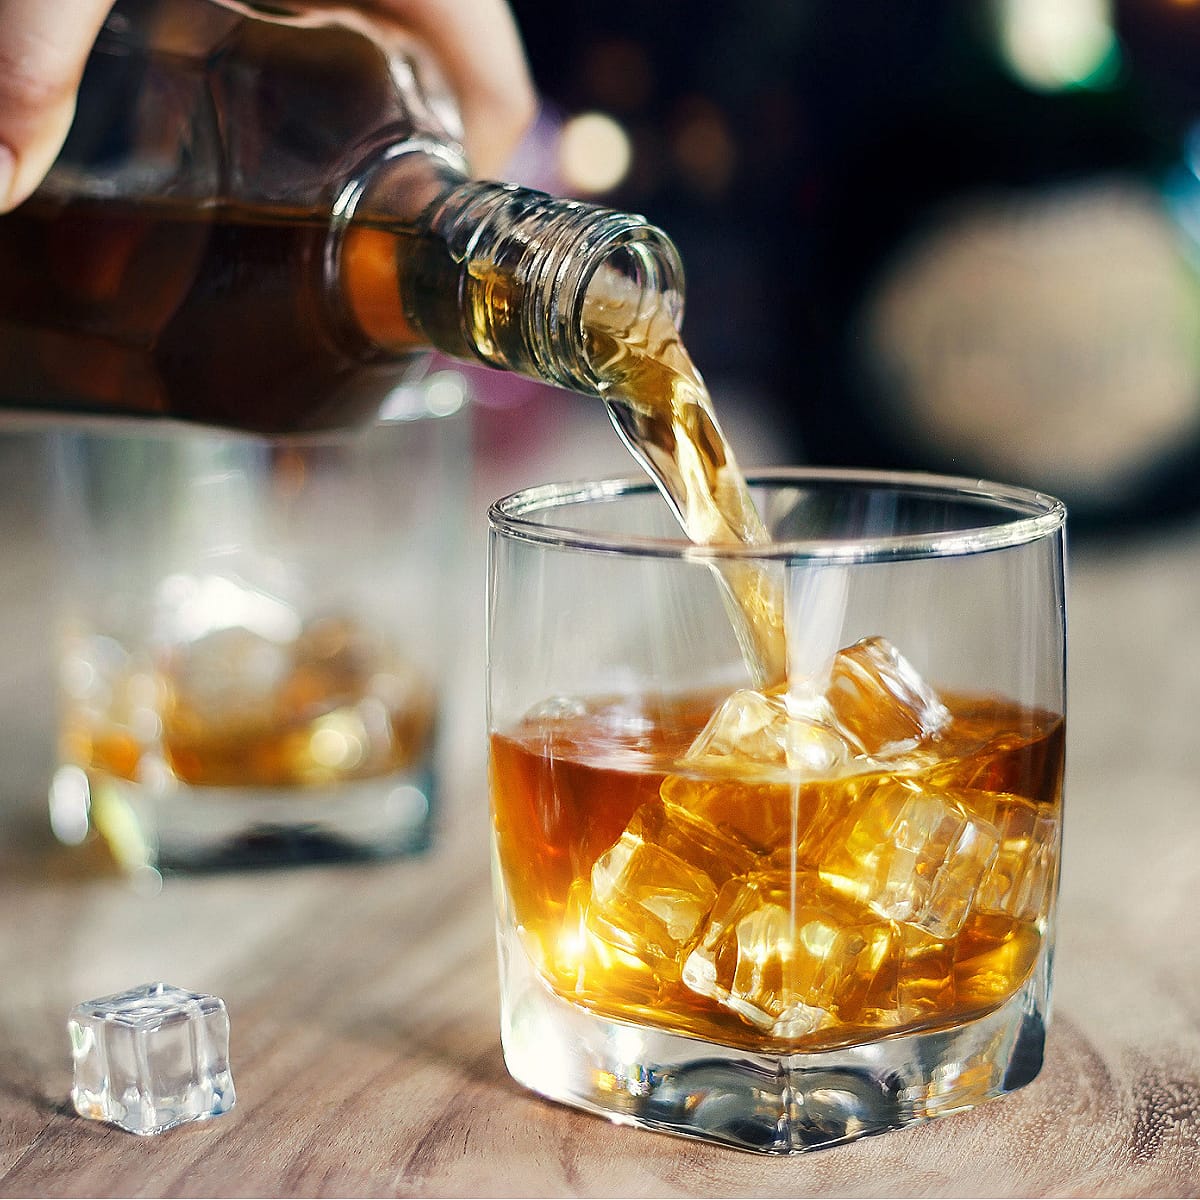 Whiskey Poured in a Glass With Ice on a Wooden Table with an Ice Cube Beside the Glass